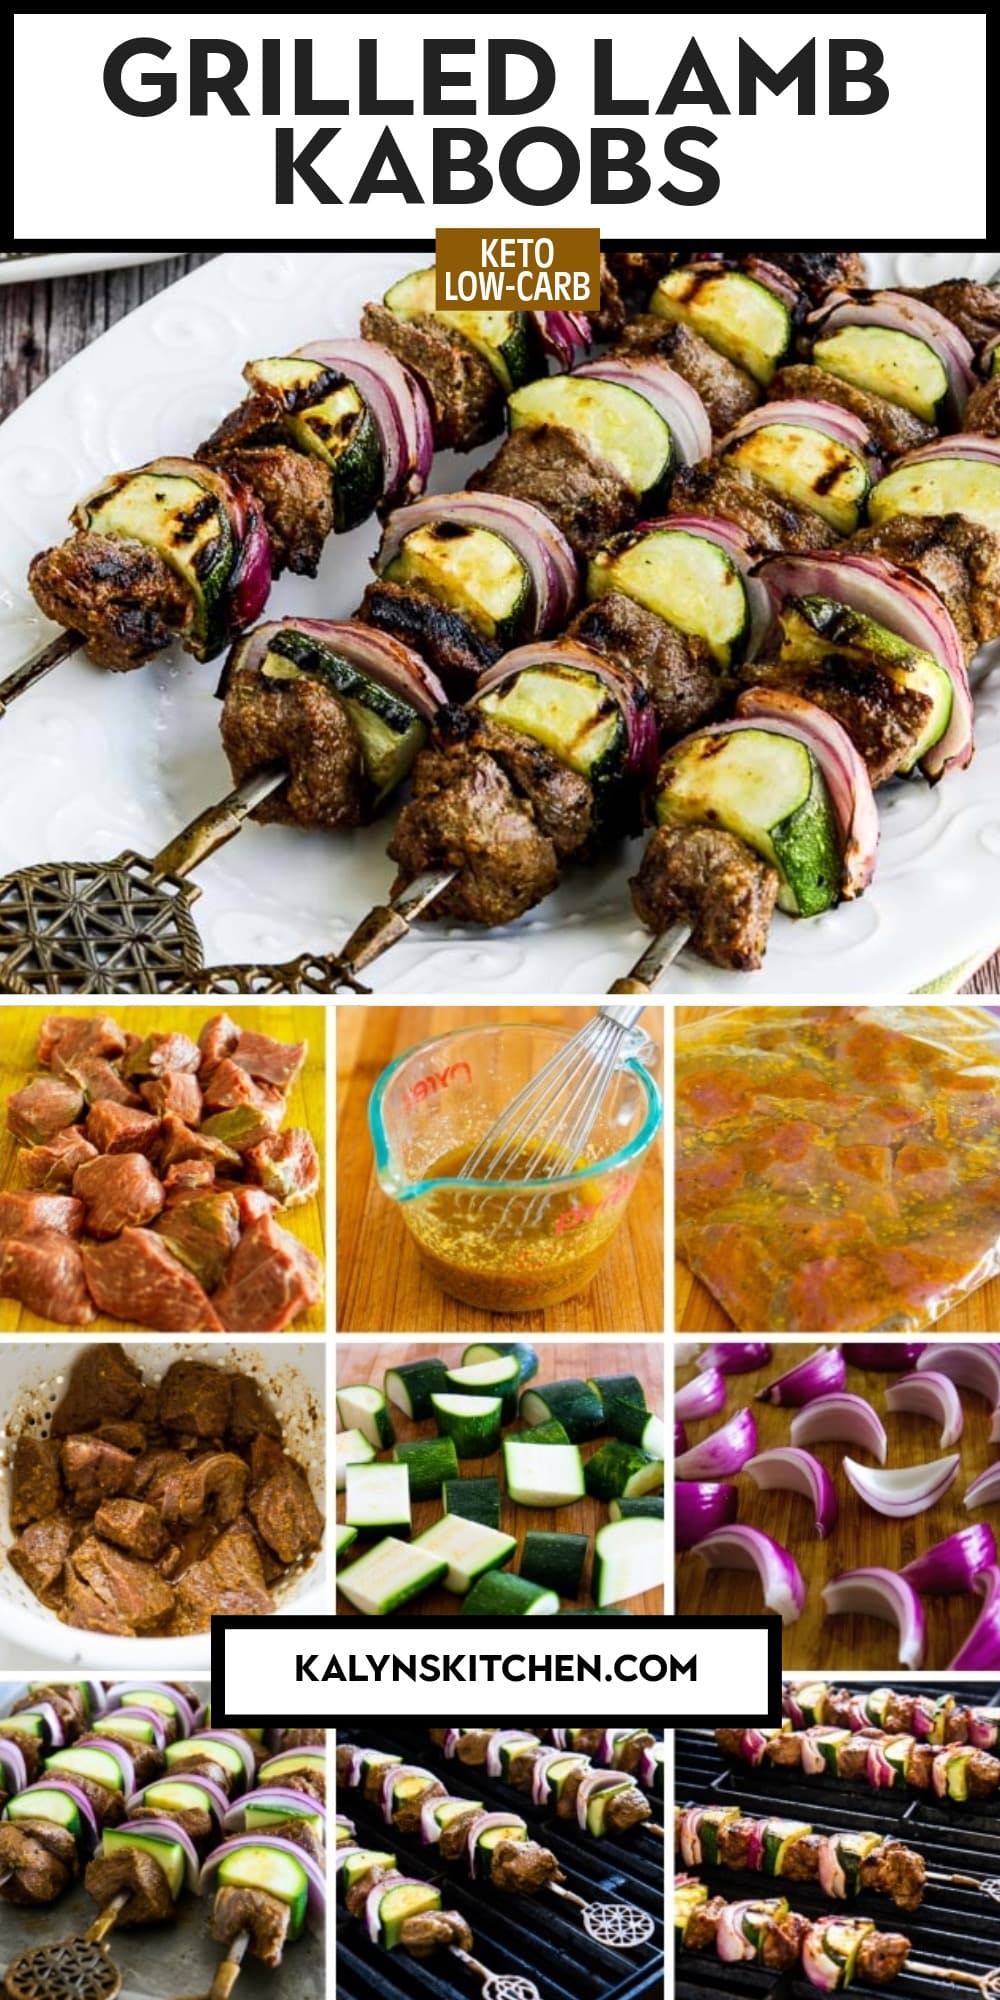 Pinterest image of Grilled Lamb Kabobs